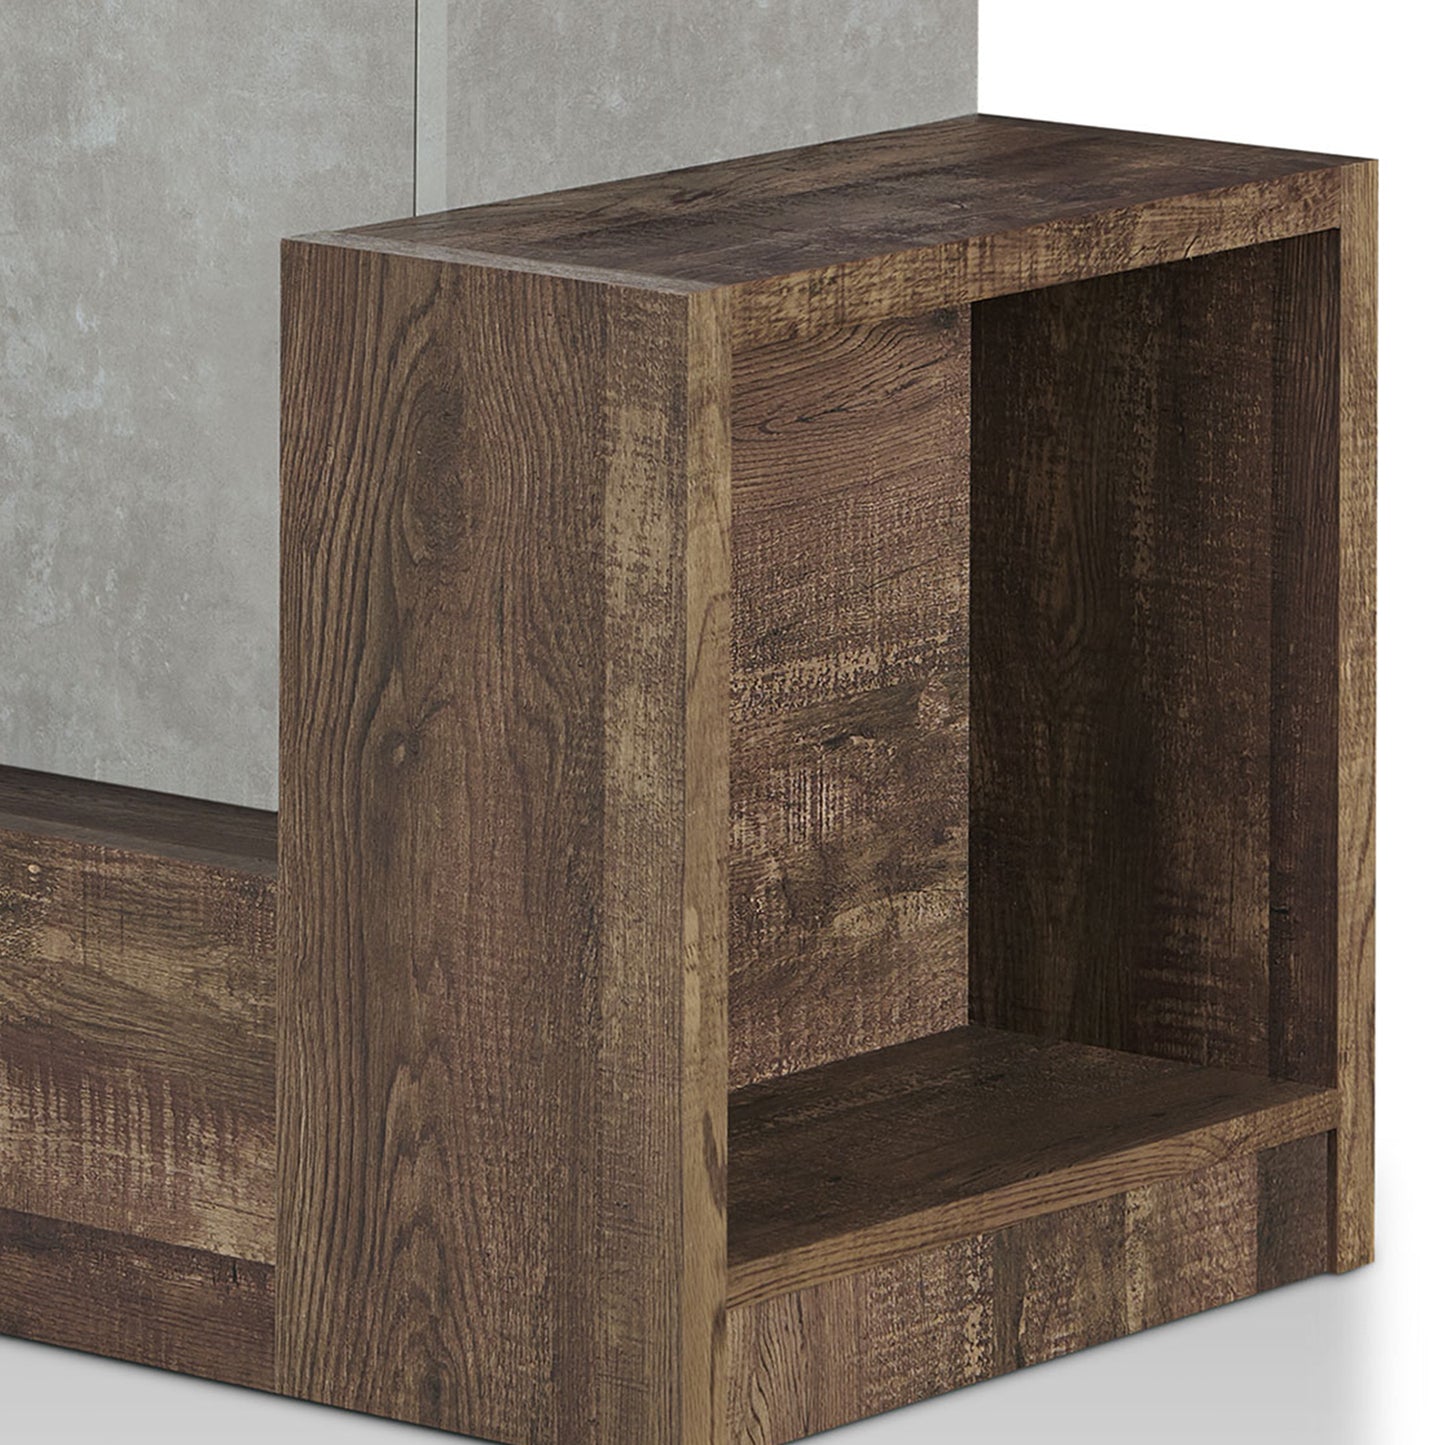 Urban Cement and Reclaimed Oak 71" Wide TV Stand